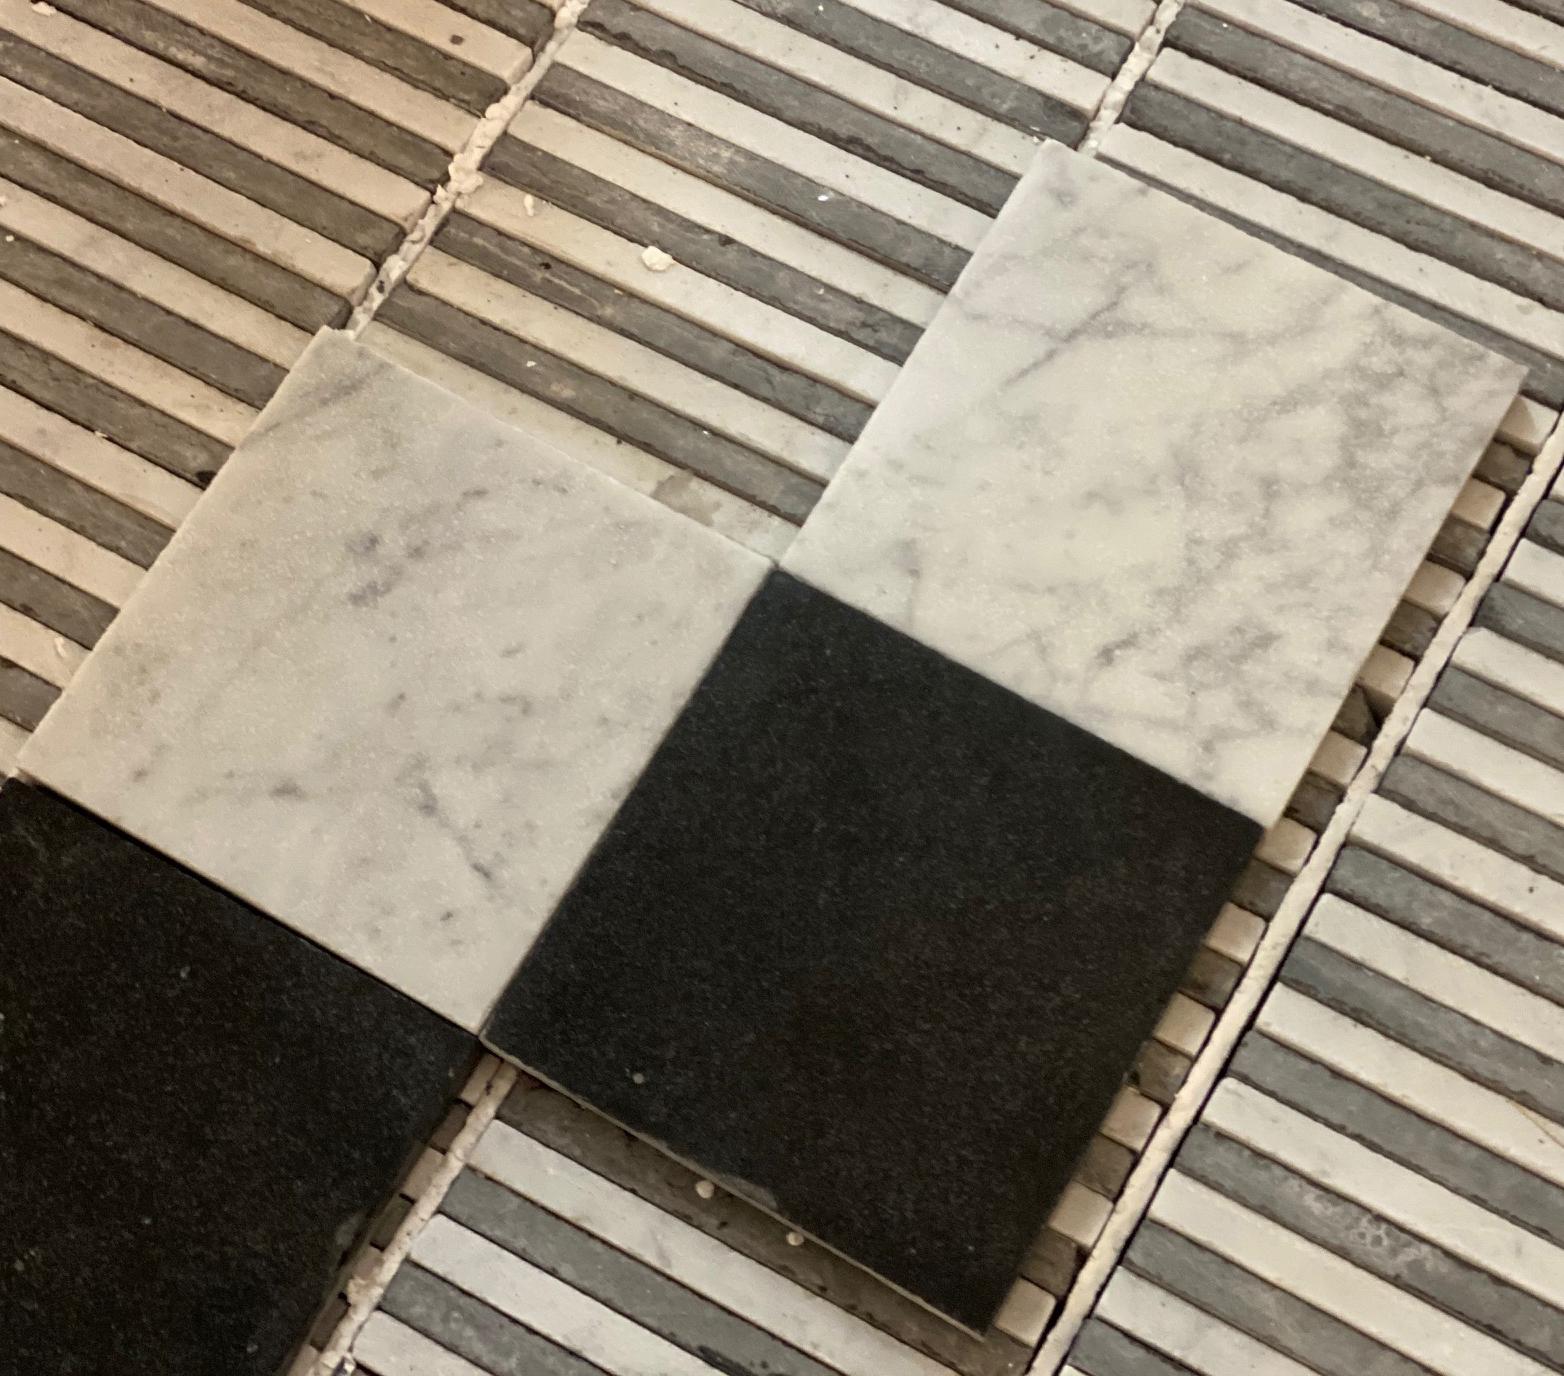 This 20 Sq Ft black and white flooring is made up of a black bluestone and white marble piece. It makes a stunning impression for any room or space. 

Each tile is 7.75